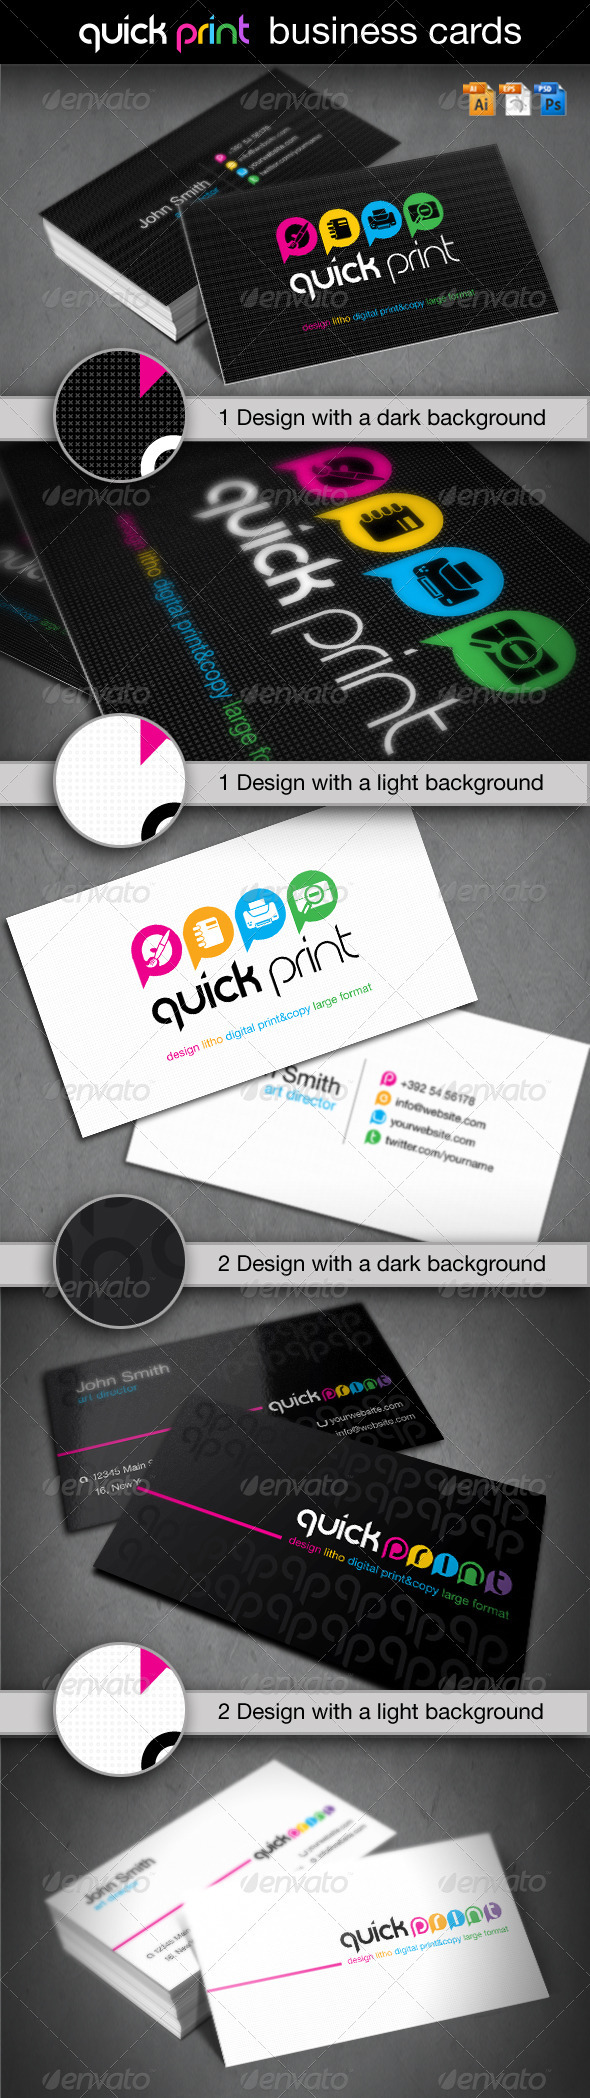 quick print business cards